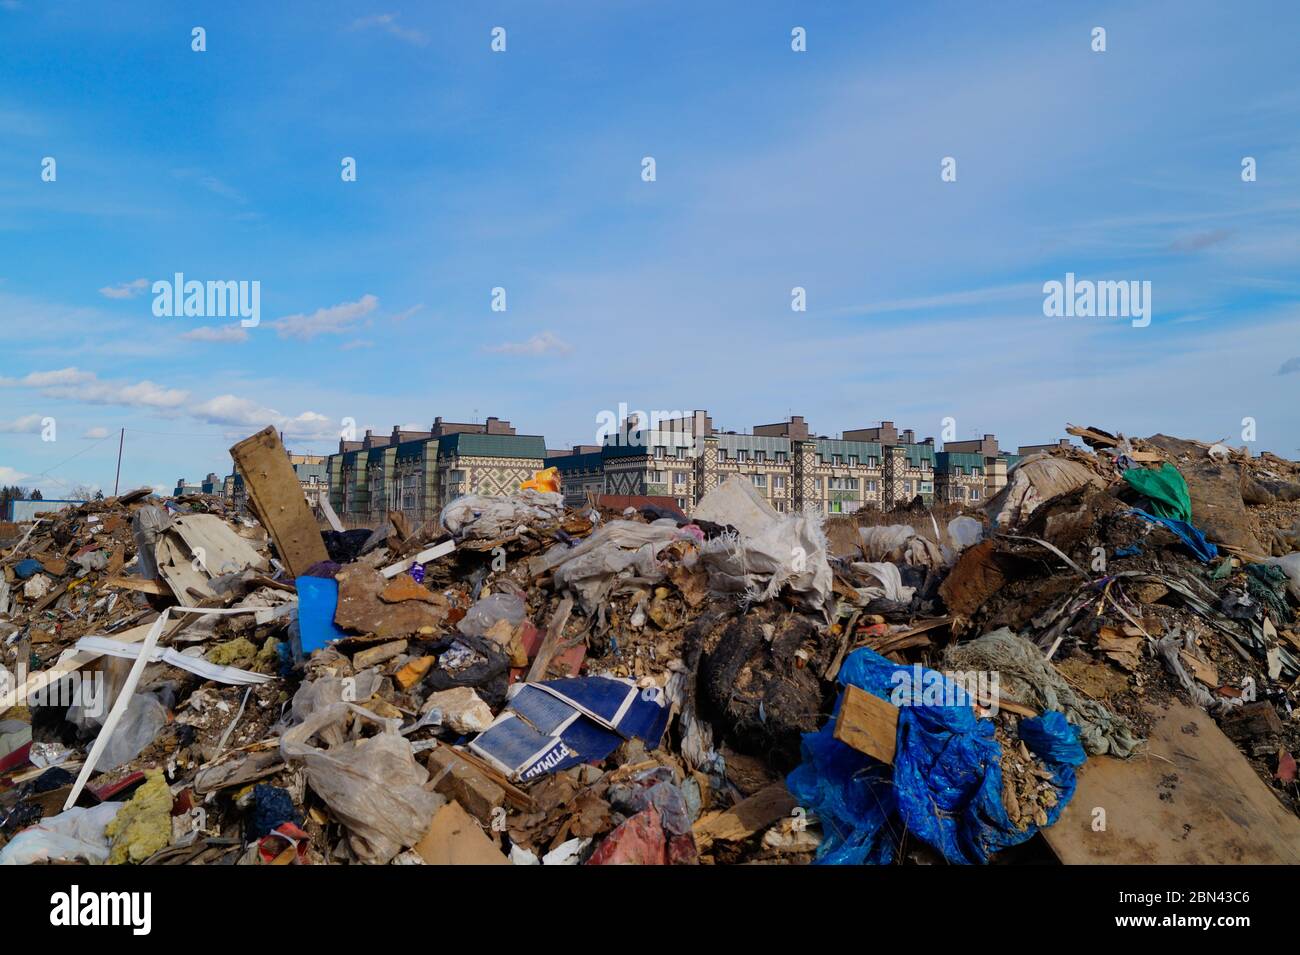 Illegal dumping site near residential buildings in Moscow Region, Russia. Local authorities struggle to implement moder waste management policies. Stock Photo